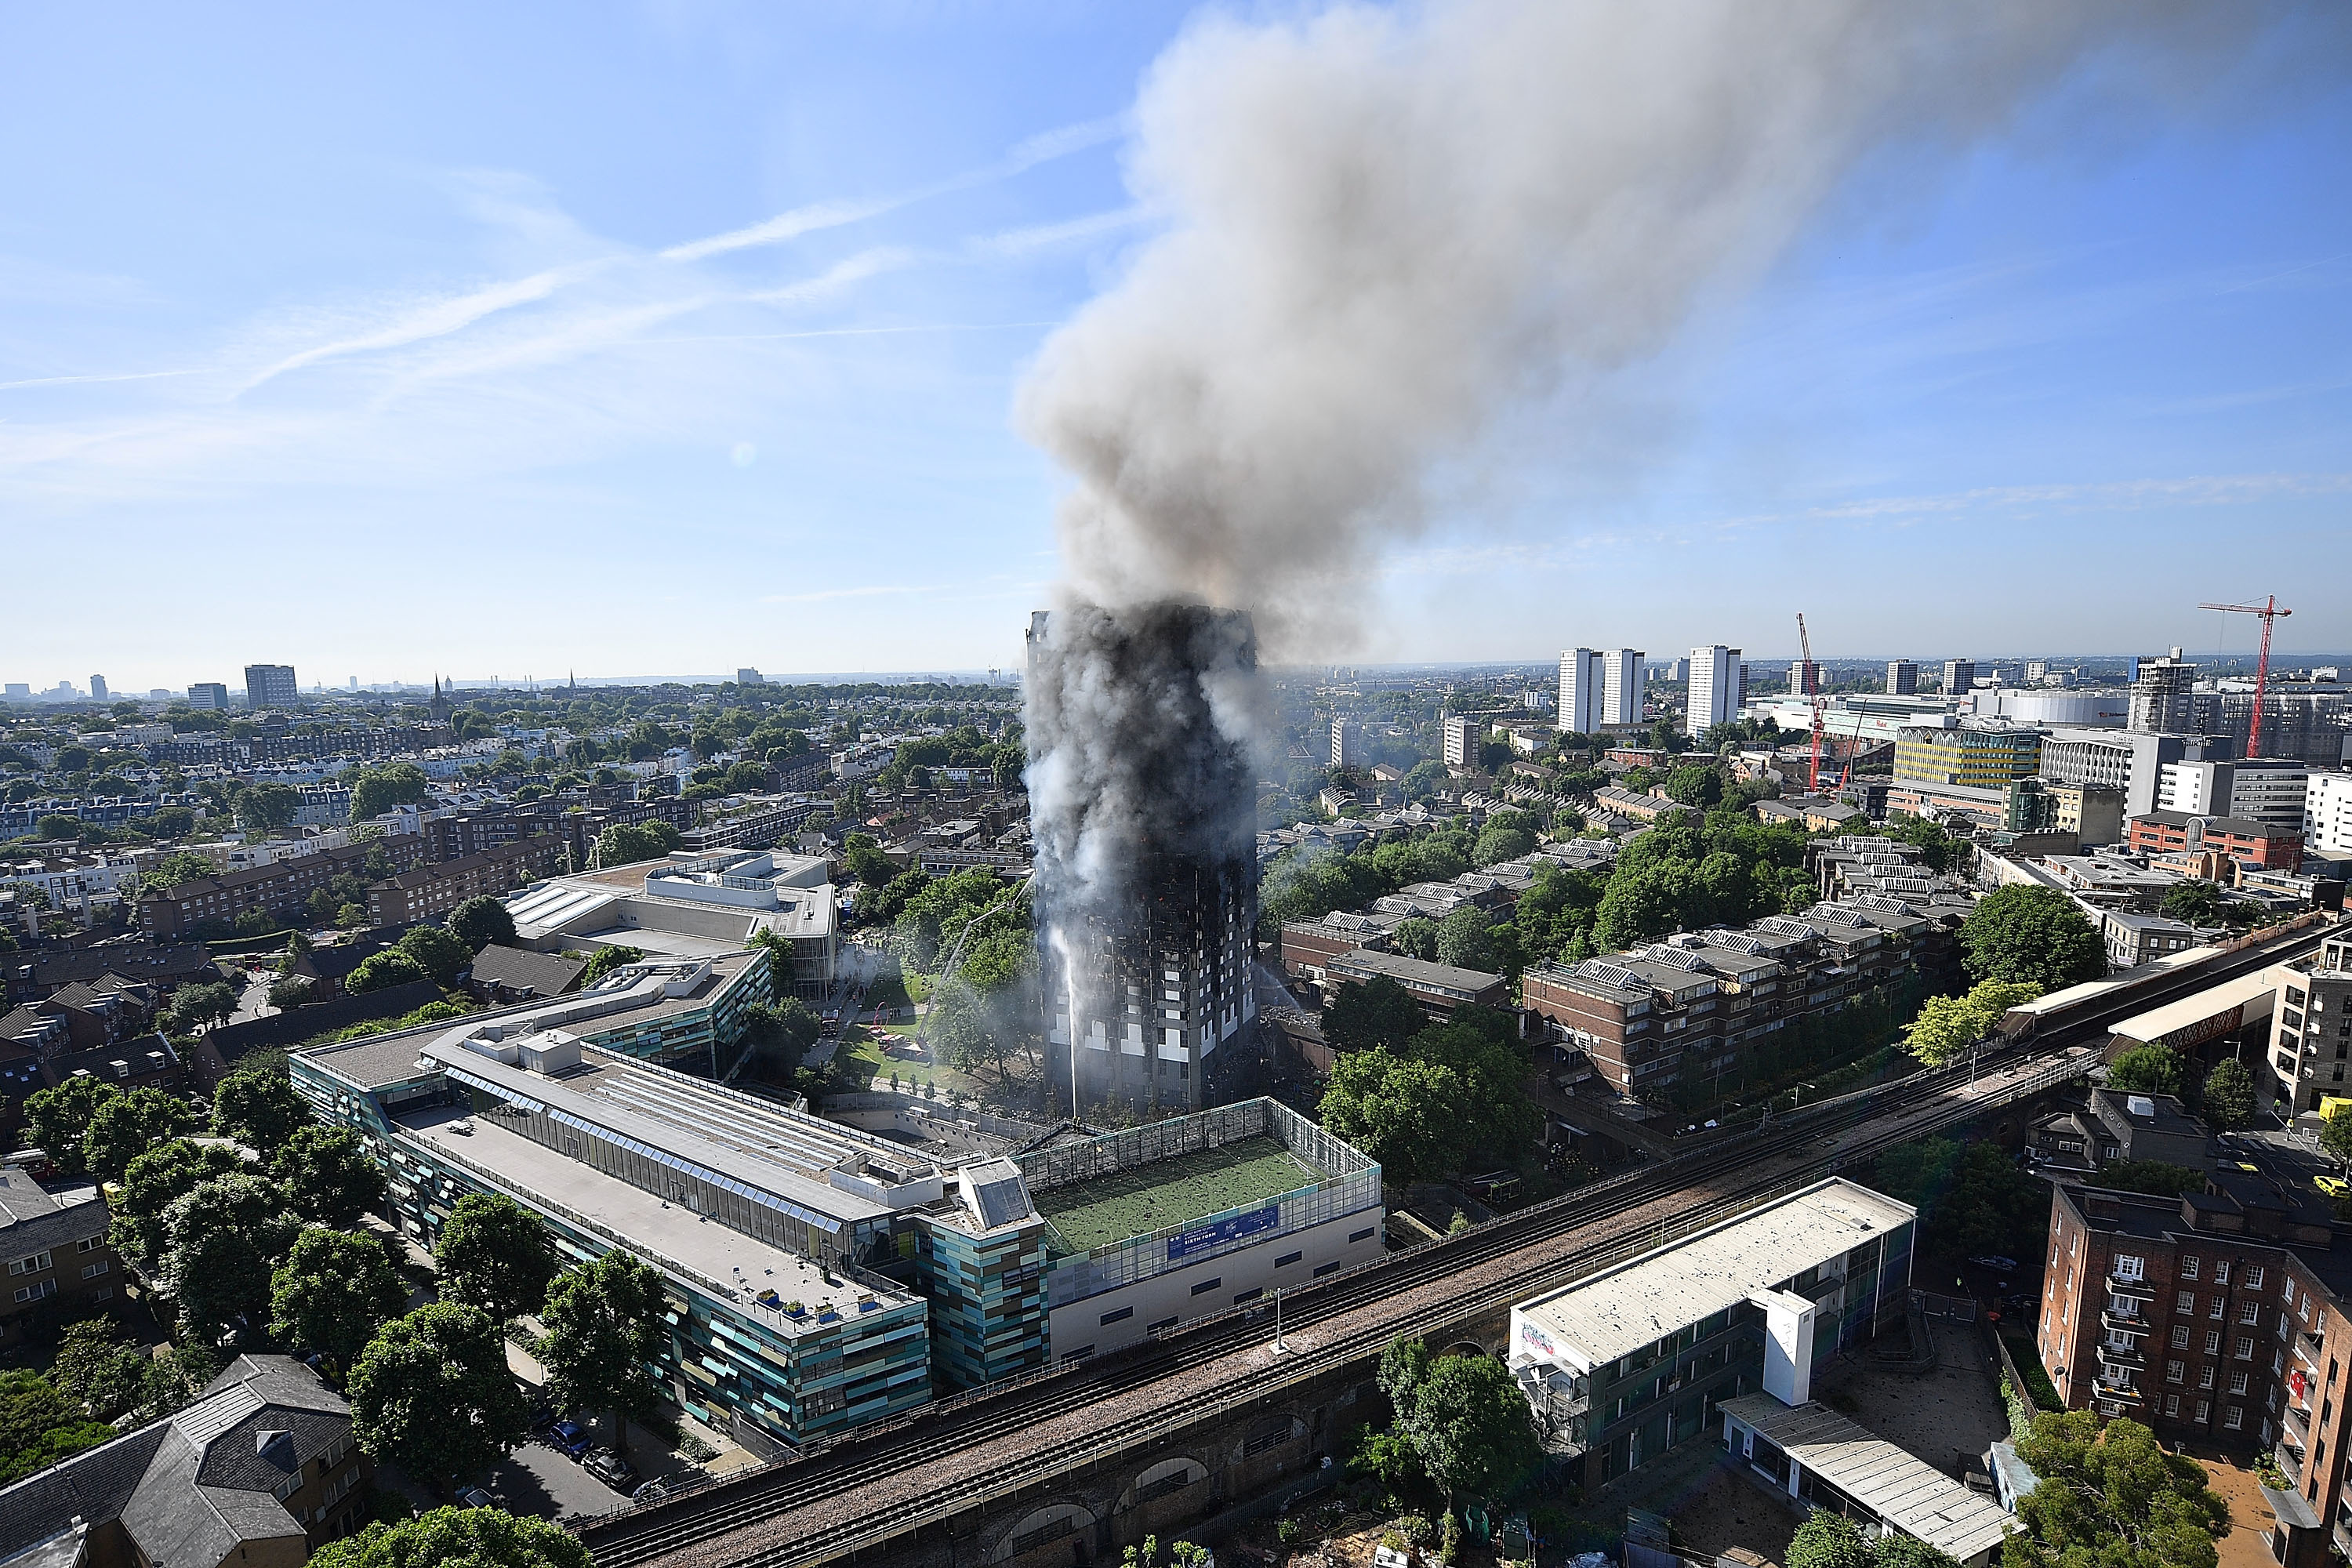 Smoke rises from the building after a huge fire engulfed the 24 story Grenfell Tower (Leon Neal/Getty Images)